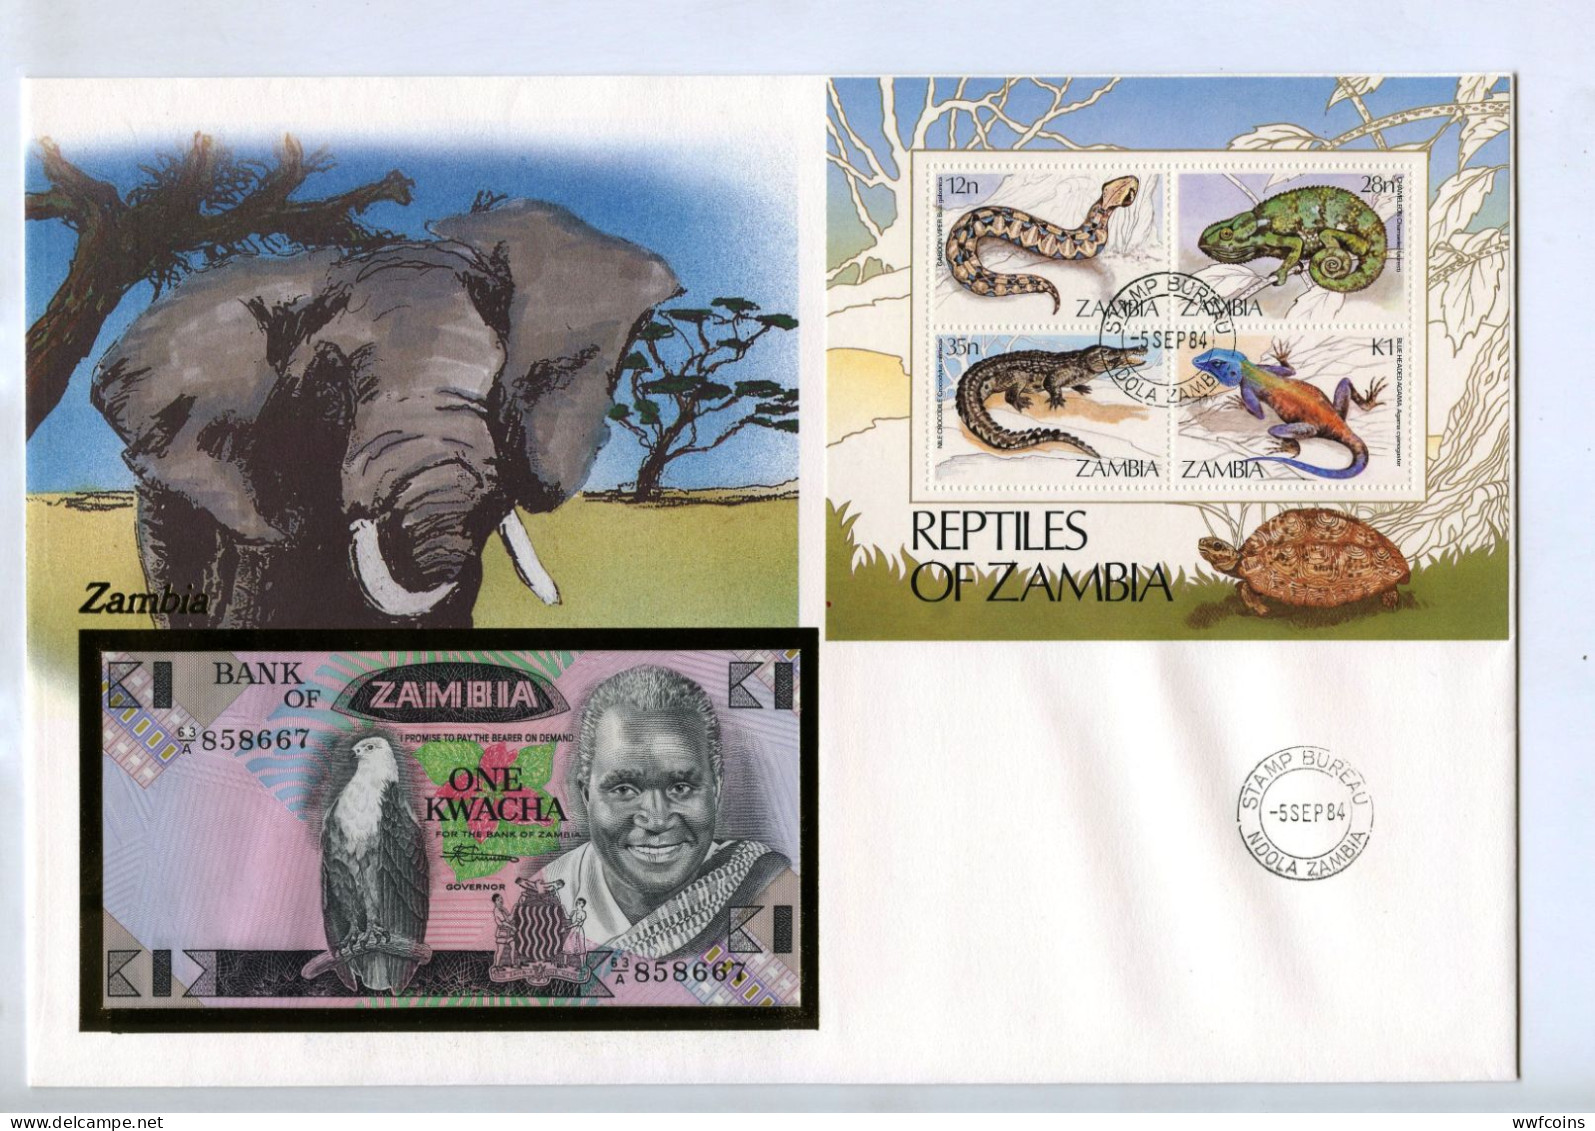 GIANT POSTCARD COMMEMORATIVE ZAMBIA EAGLE FIRST DAY ISSUE SNAKE CAMALEON ELEPHANT FDS UNC - Zambia